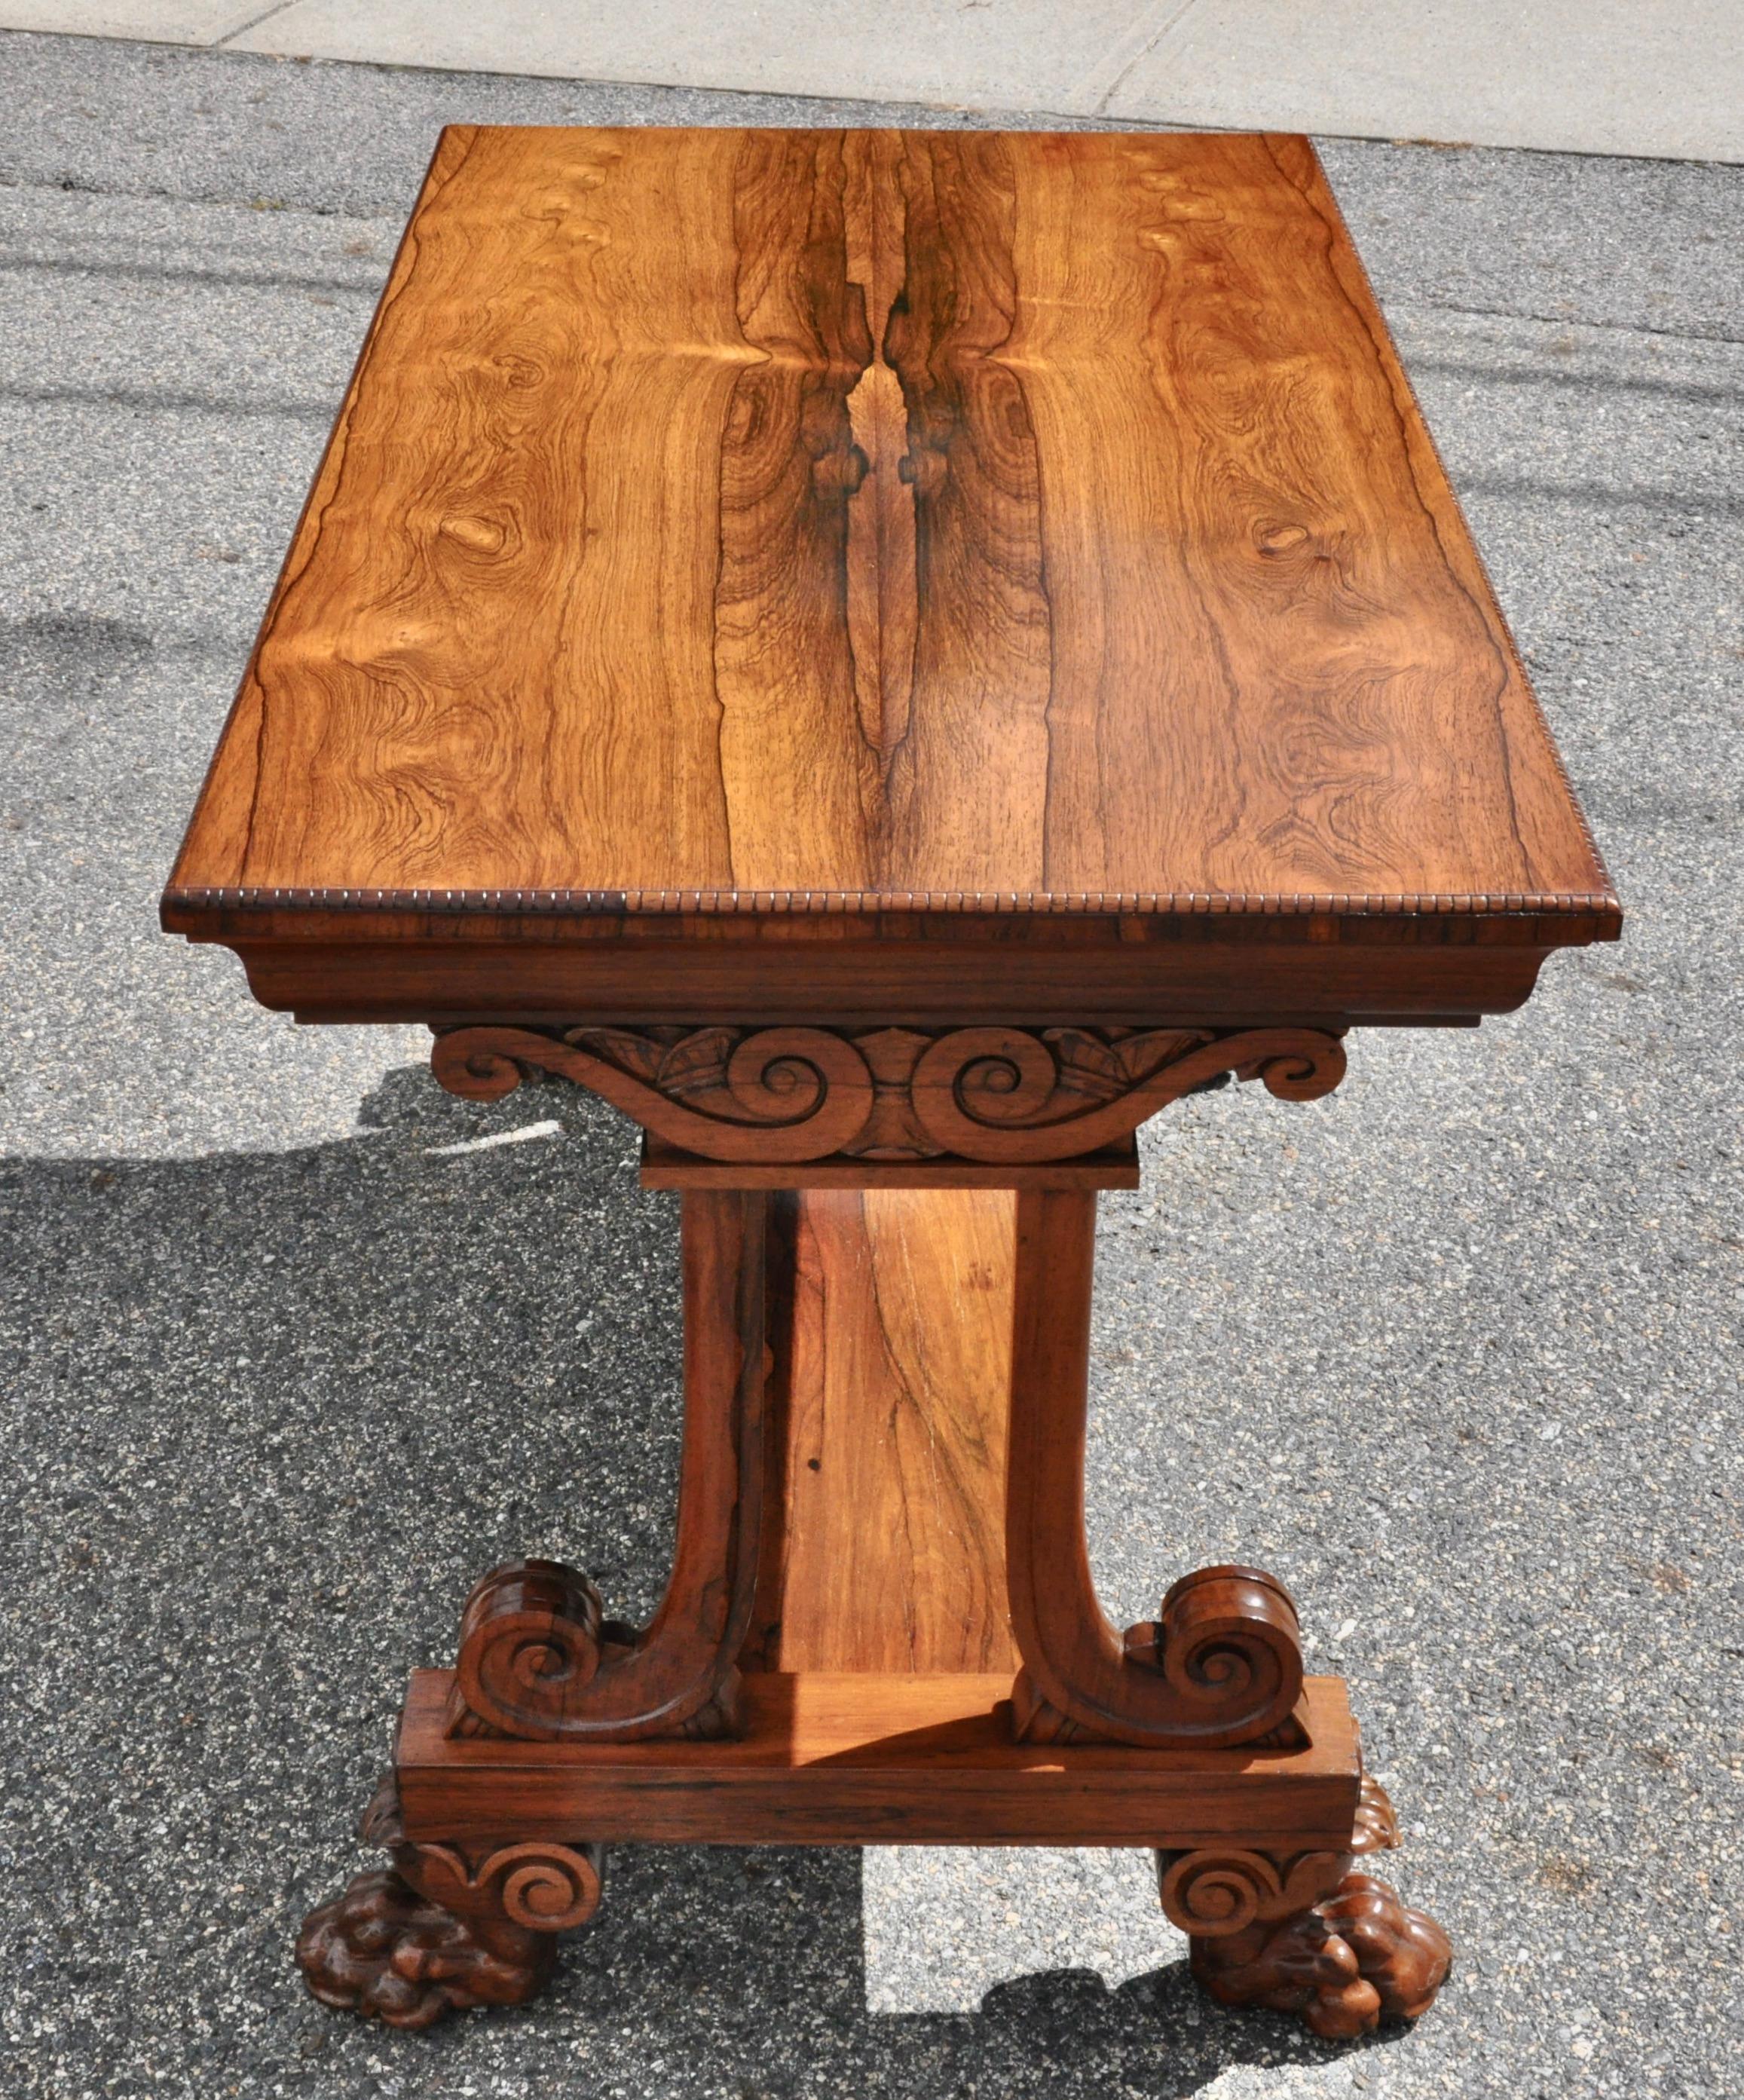 Period rosewood sofa table by the Acclaimed cabinetmakers, Thomas and George Seddon, London

On a for by Thomas Hope, neoclassical and Greek inspired. Beautiful matched rosewood.

Virtually identical to Christies, Lot 18, April 24, 2008, London